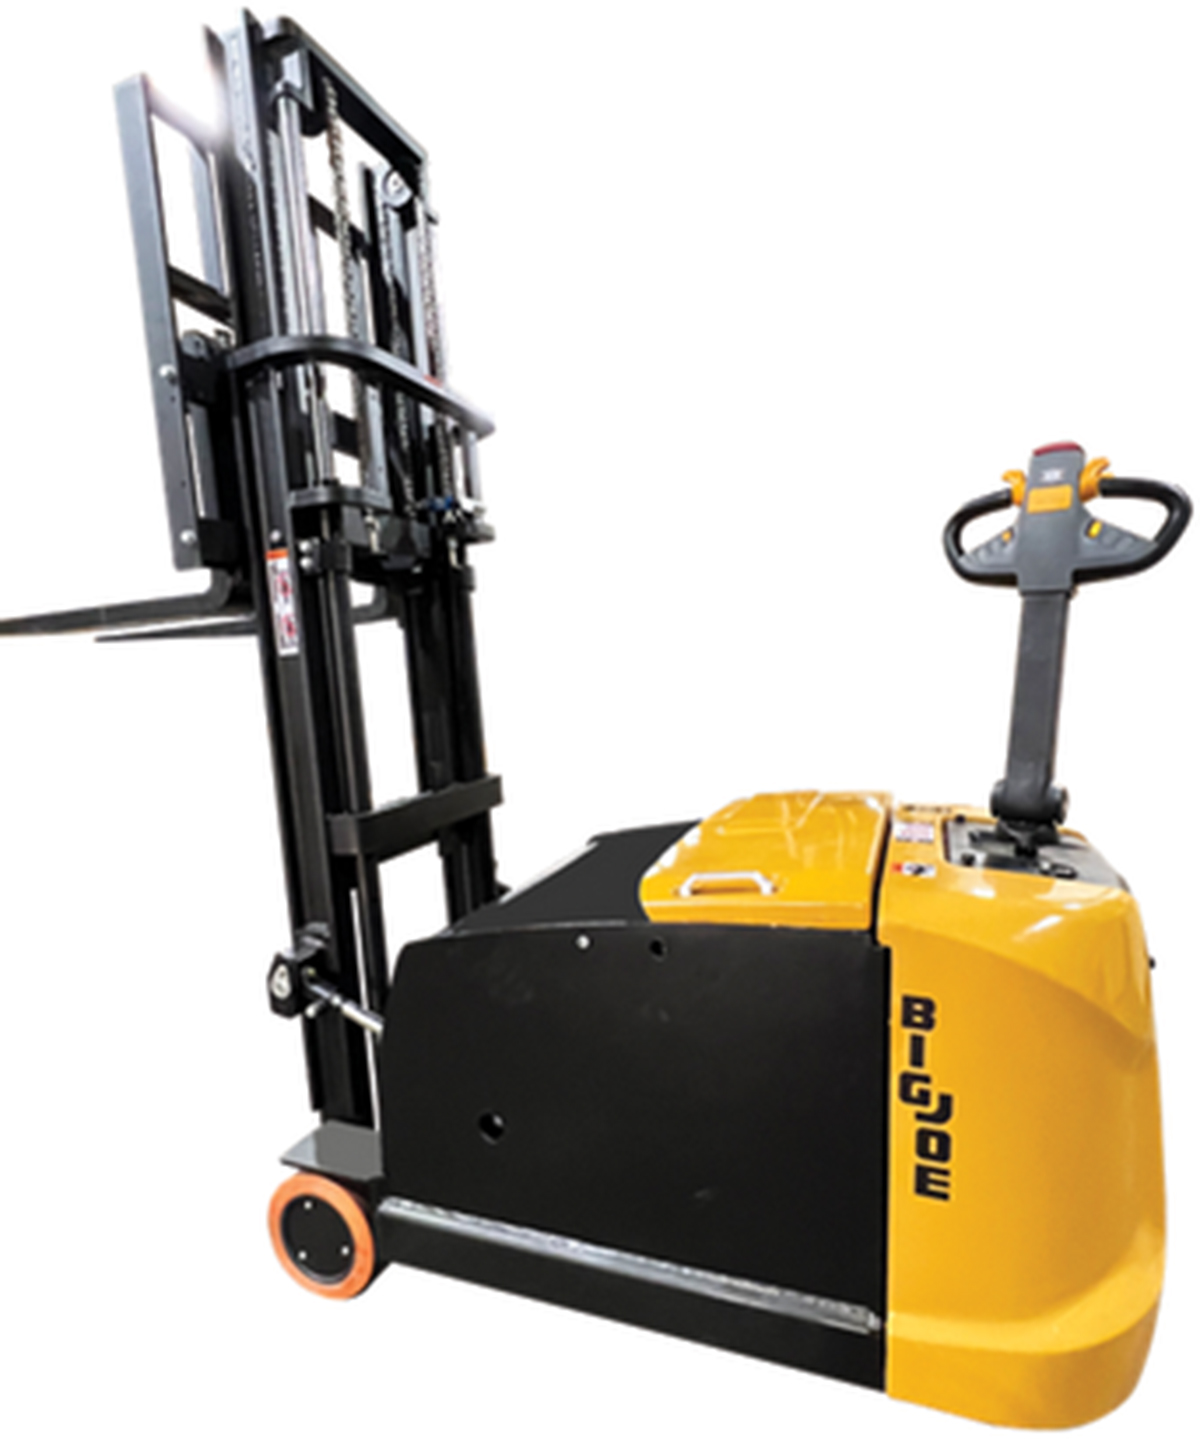  CB30 and CB35 Walkie Counter-balance Stackers are walking stackers that are a safer alternative to forklifts